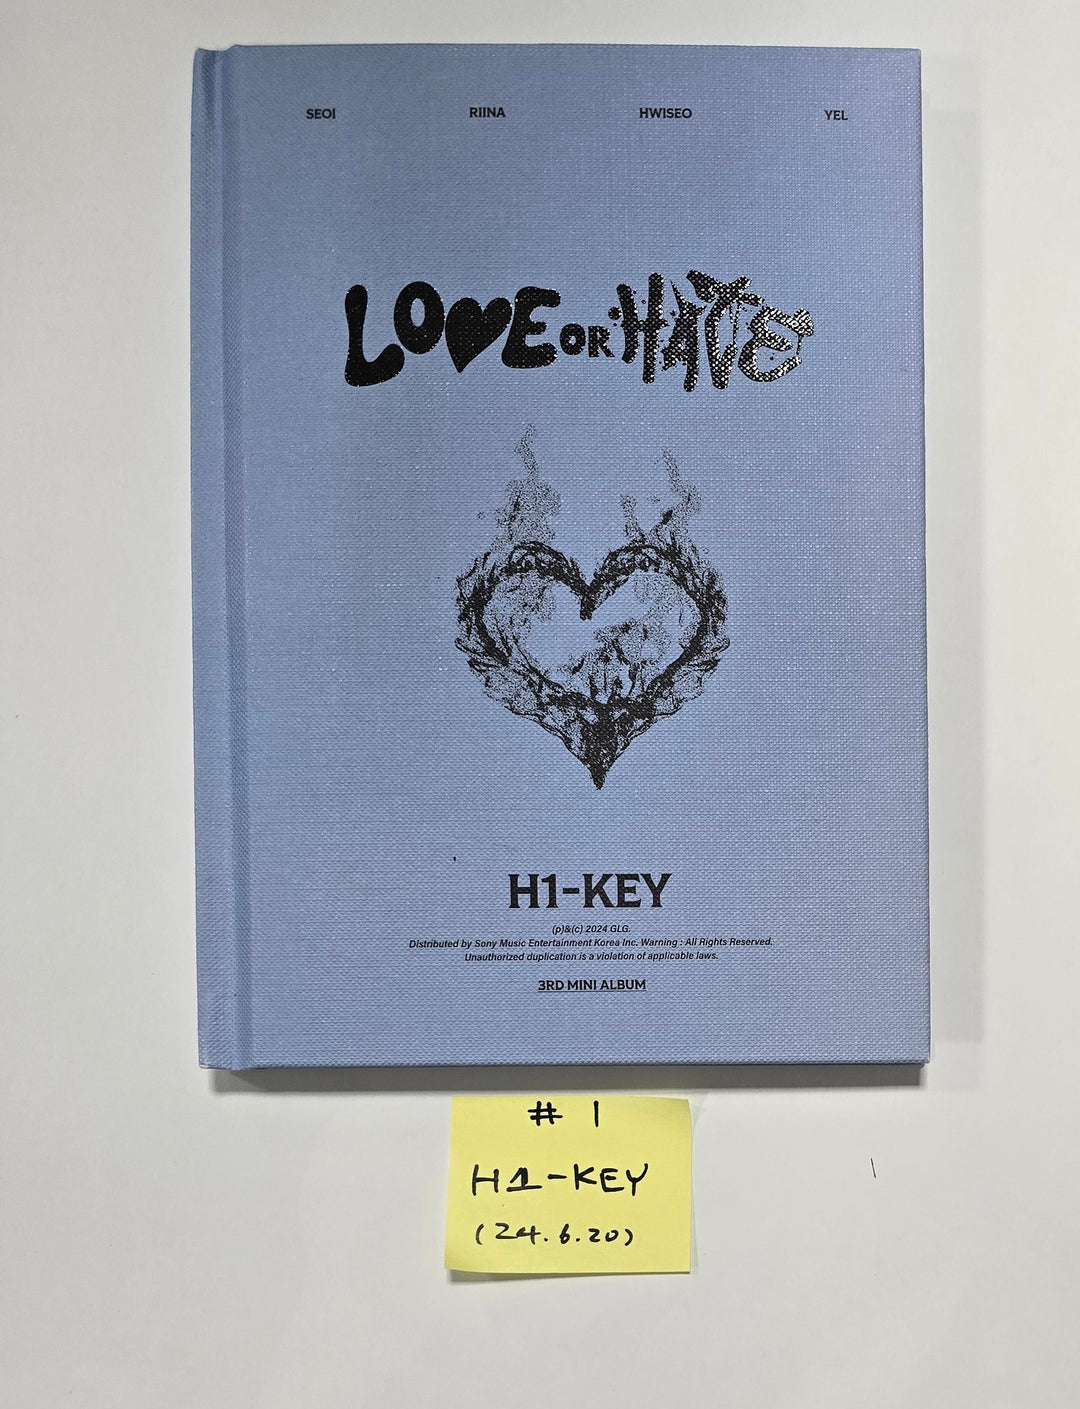 H1-KEY "LOVE or HATE" - Hand Autographed(Signed) Promo Album [24.6.20]